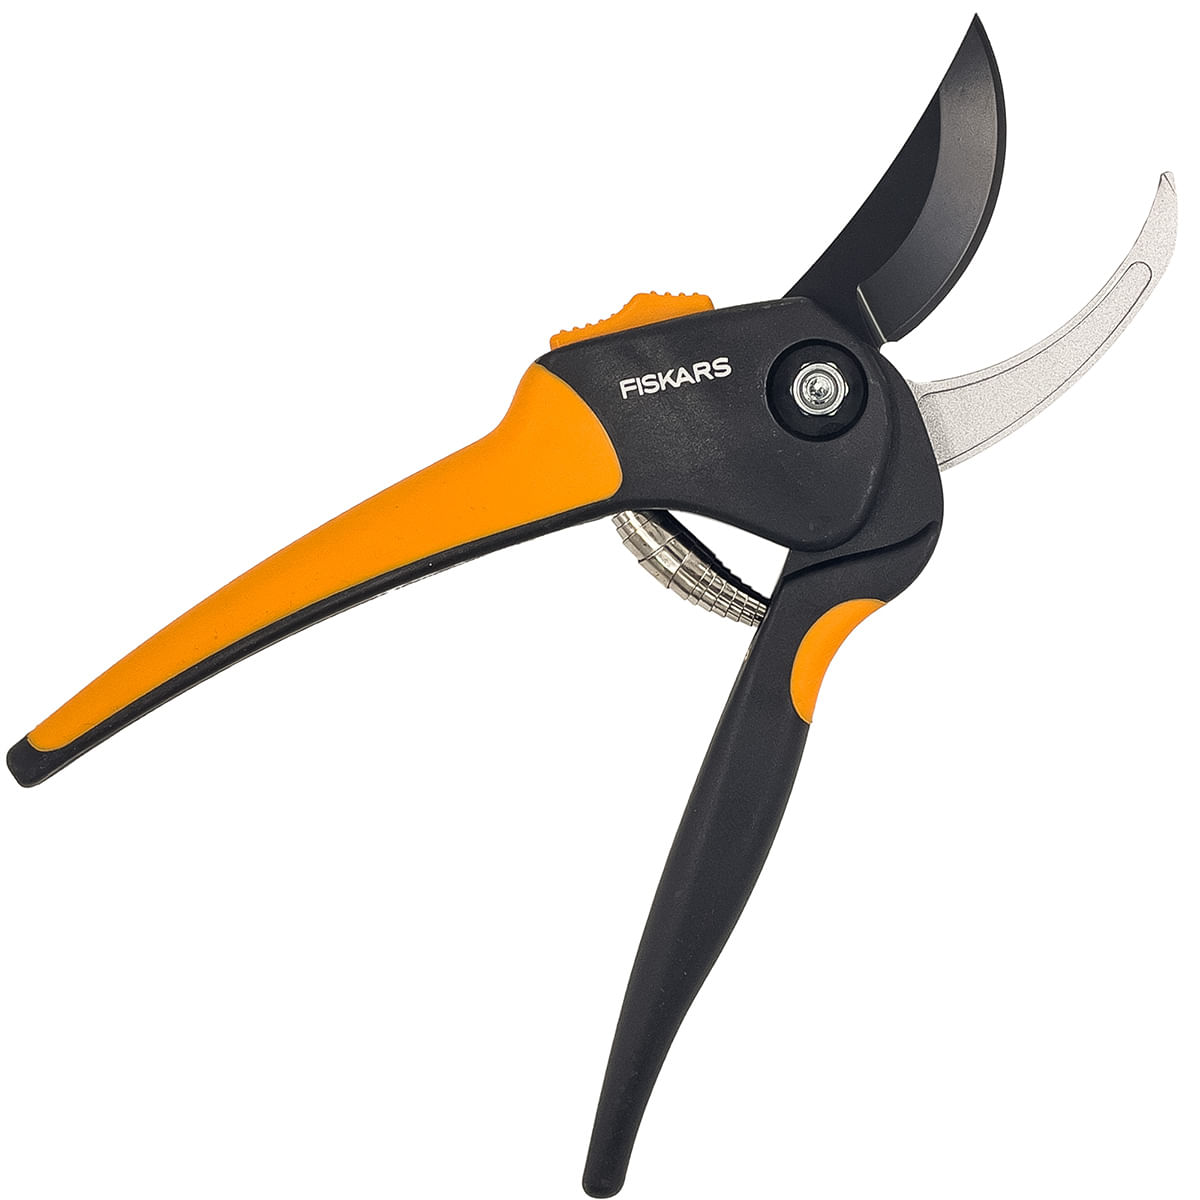 Fiskars Large Bypass Pruner, Steel Blade with Softgrip Handle for Medium to Large Hands, Size: 12 inch, Black